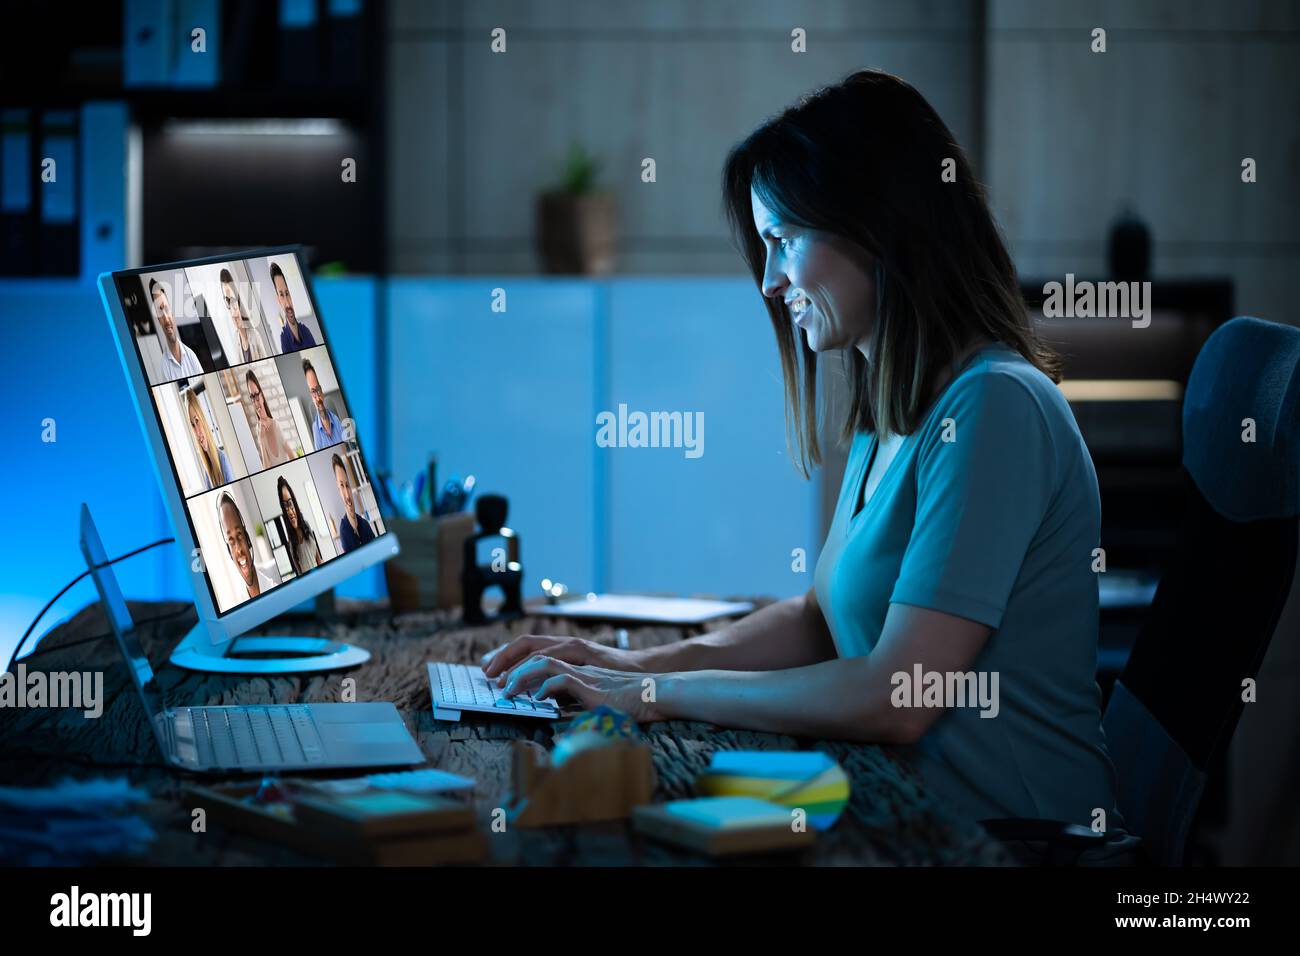 Remote Learning Video Conference Business Call Online Stock Photo